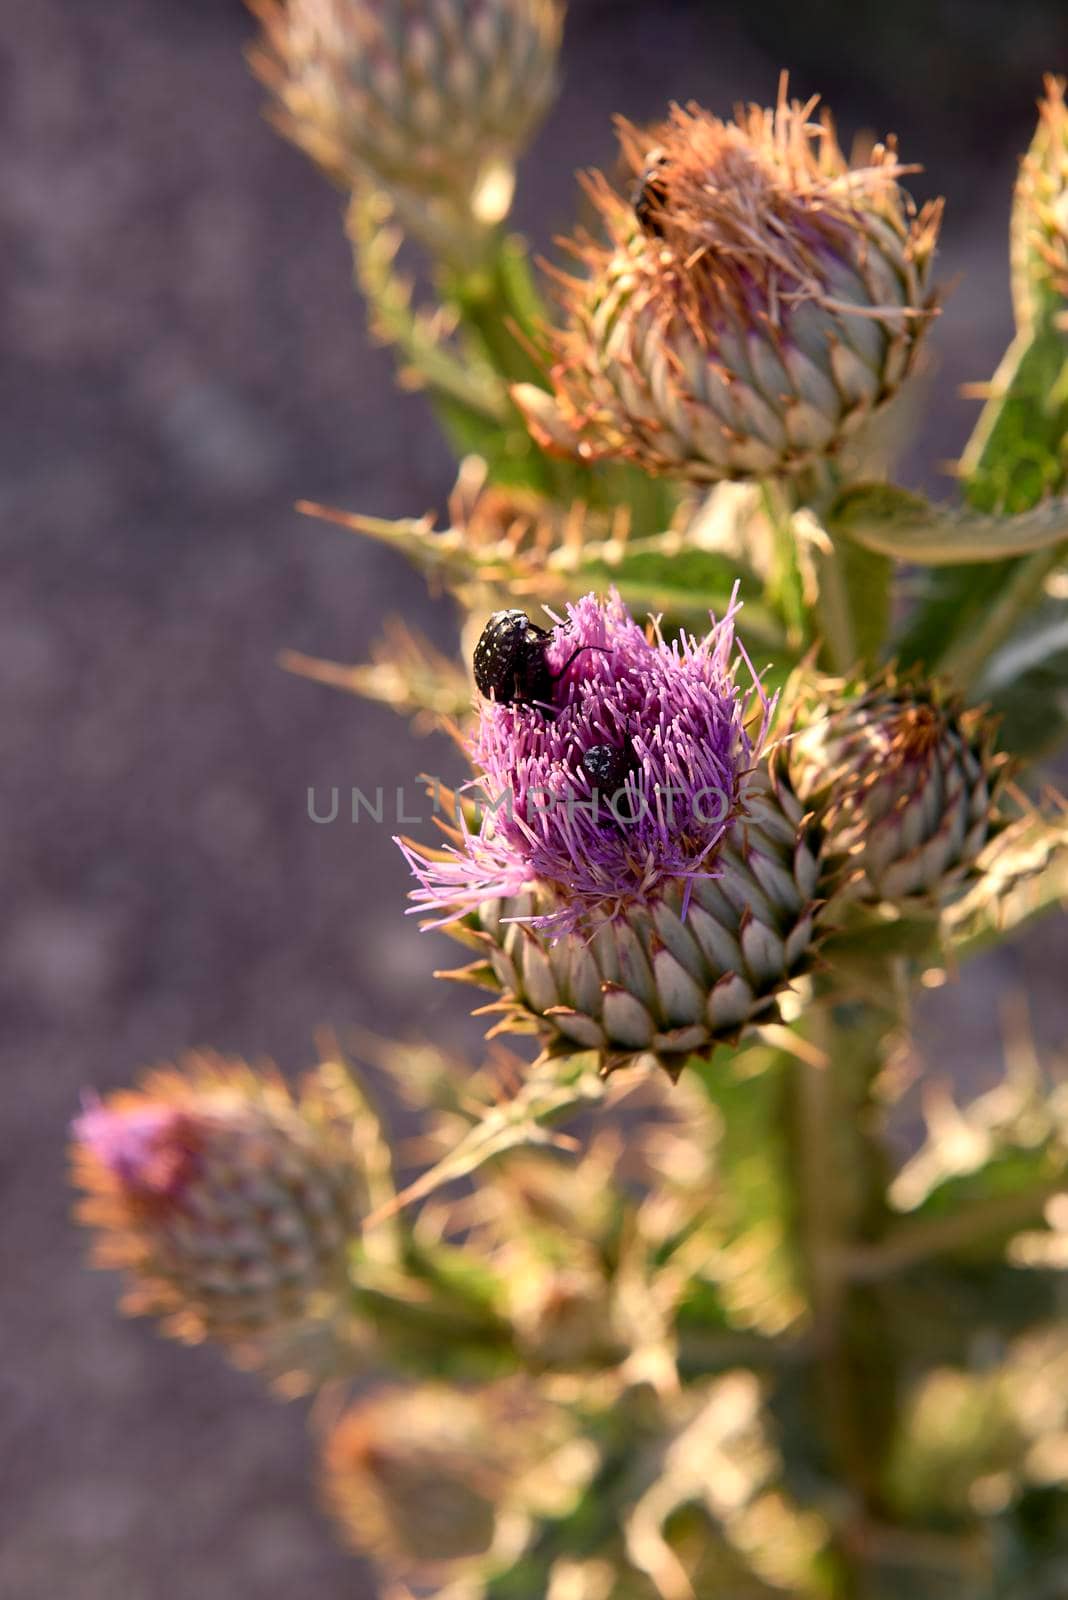 A black insect on blue thistle flower.Detail and macro photography, out-of-focus background, solitary, sunny, blue